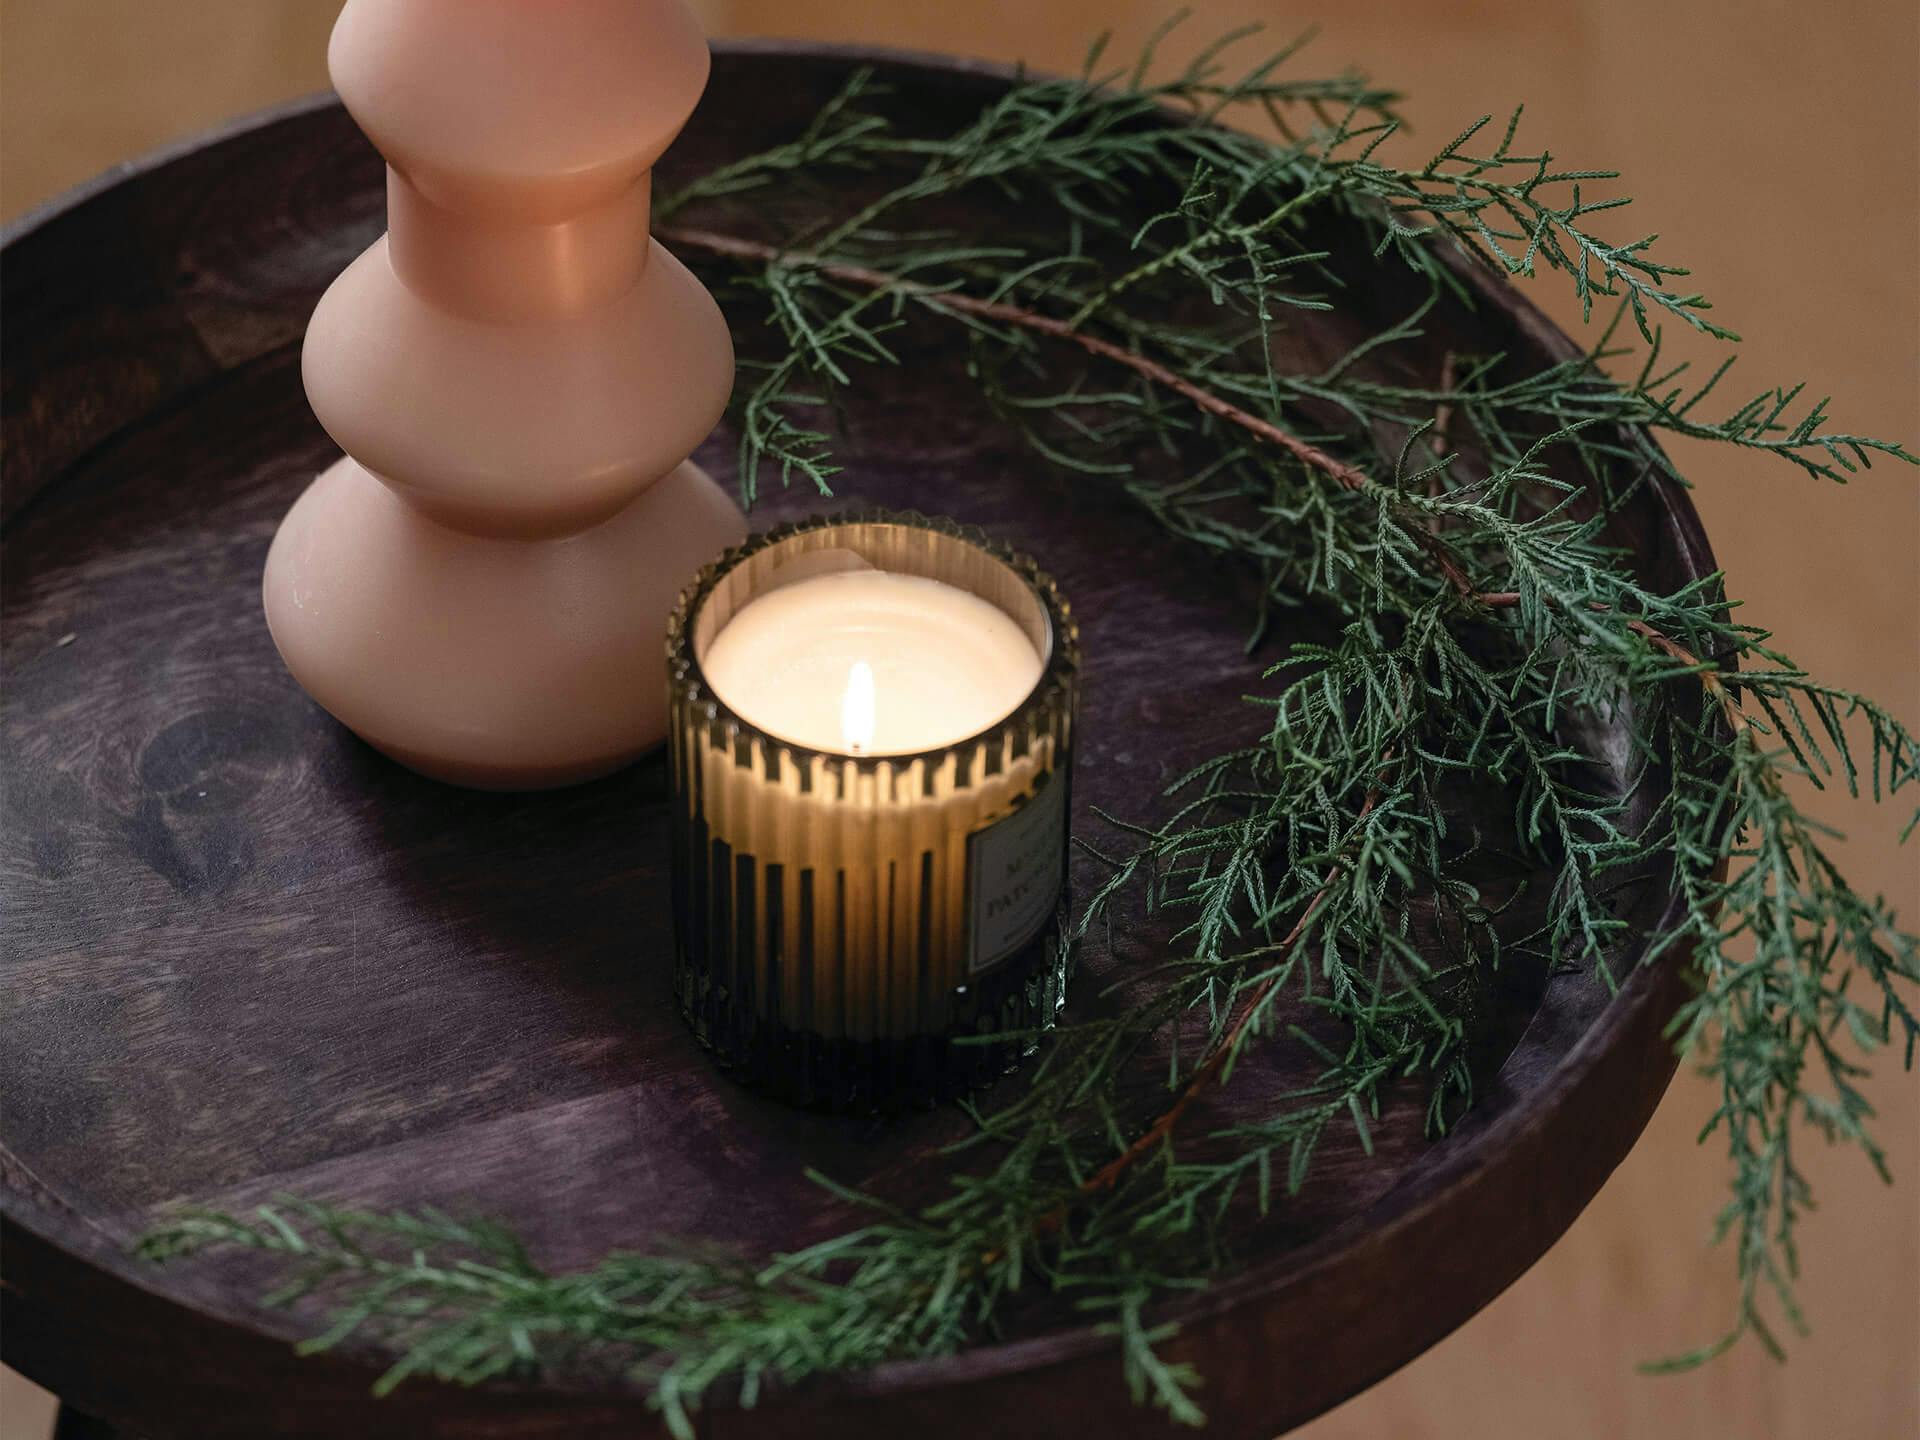 Decorative image of a small round side table with a lit candle and vase